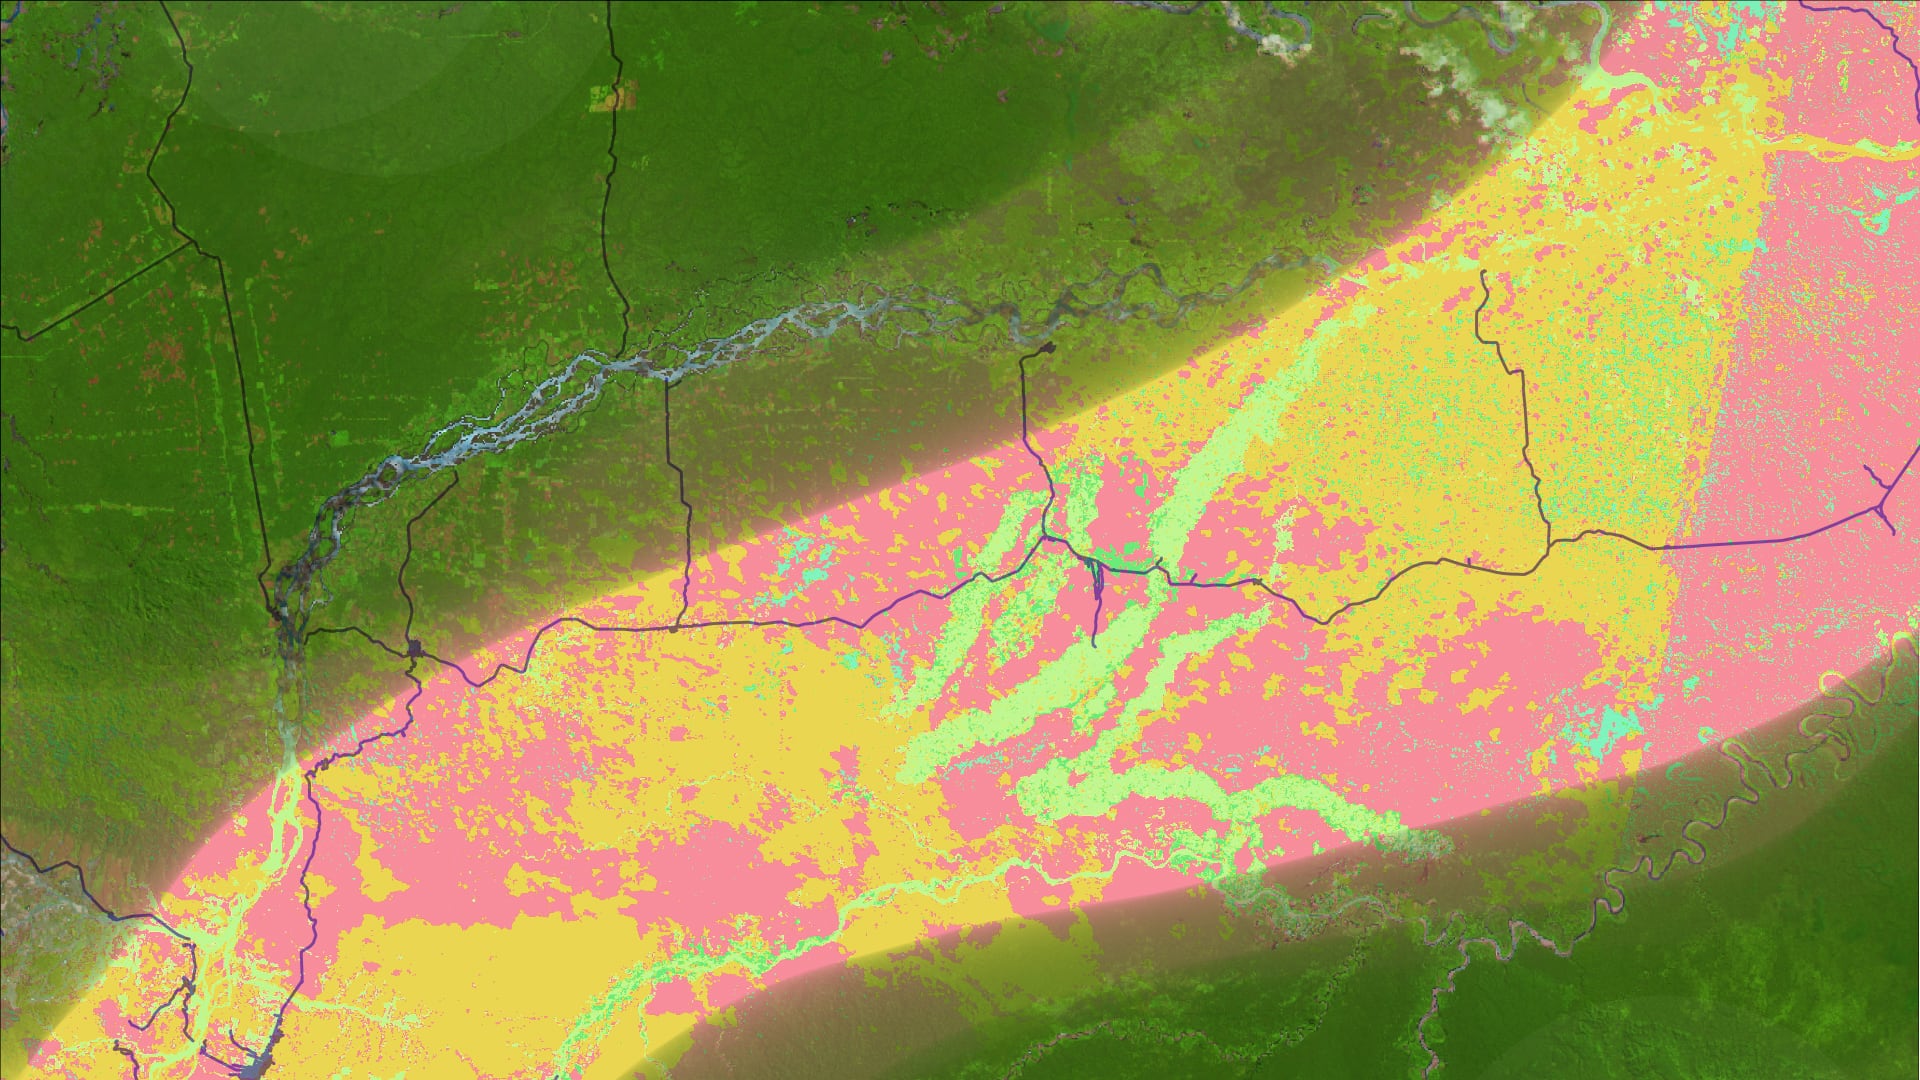 Land use classification imagery using 2020 Landsat 8 OLI data, blended with a false color band combination (6,5,4), with the highway system overlayed in dark blue. Pictured is the Madre de Dios region of Peru, centered around the La Pampa illegal mining site. The light green indicates areas of gold mining, areas in pink represent wetlands, and areas in yellow represent forest cover. Tracking land use change allows agencies to understand where deforestation is occurring.Keywords: Nelson Huffaker, Oliver Nguyen, Elizabeth Stapleton, Ariel Calle, Nataly Chacon